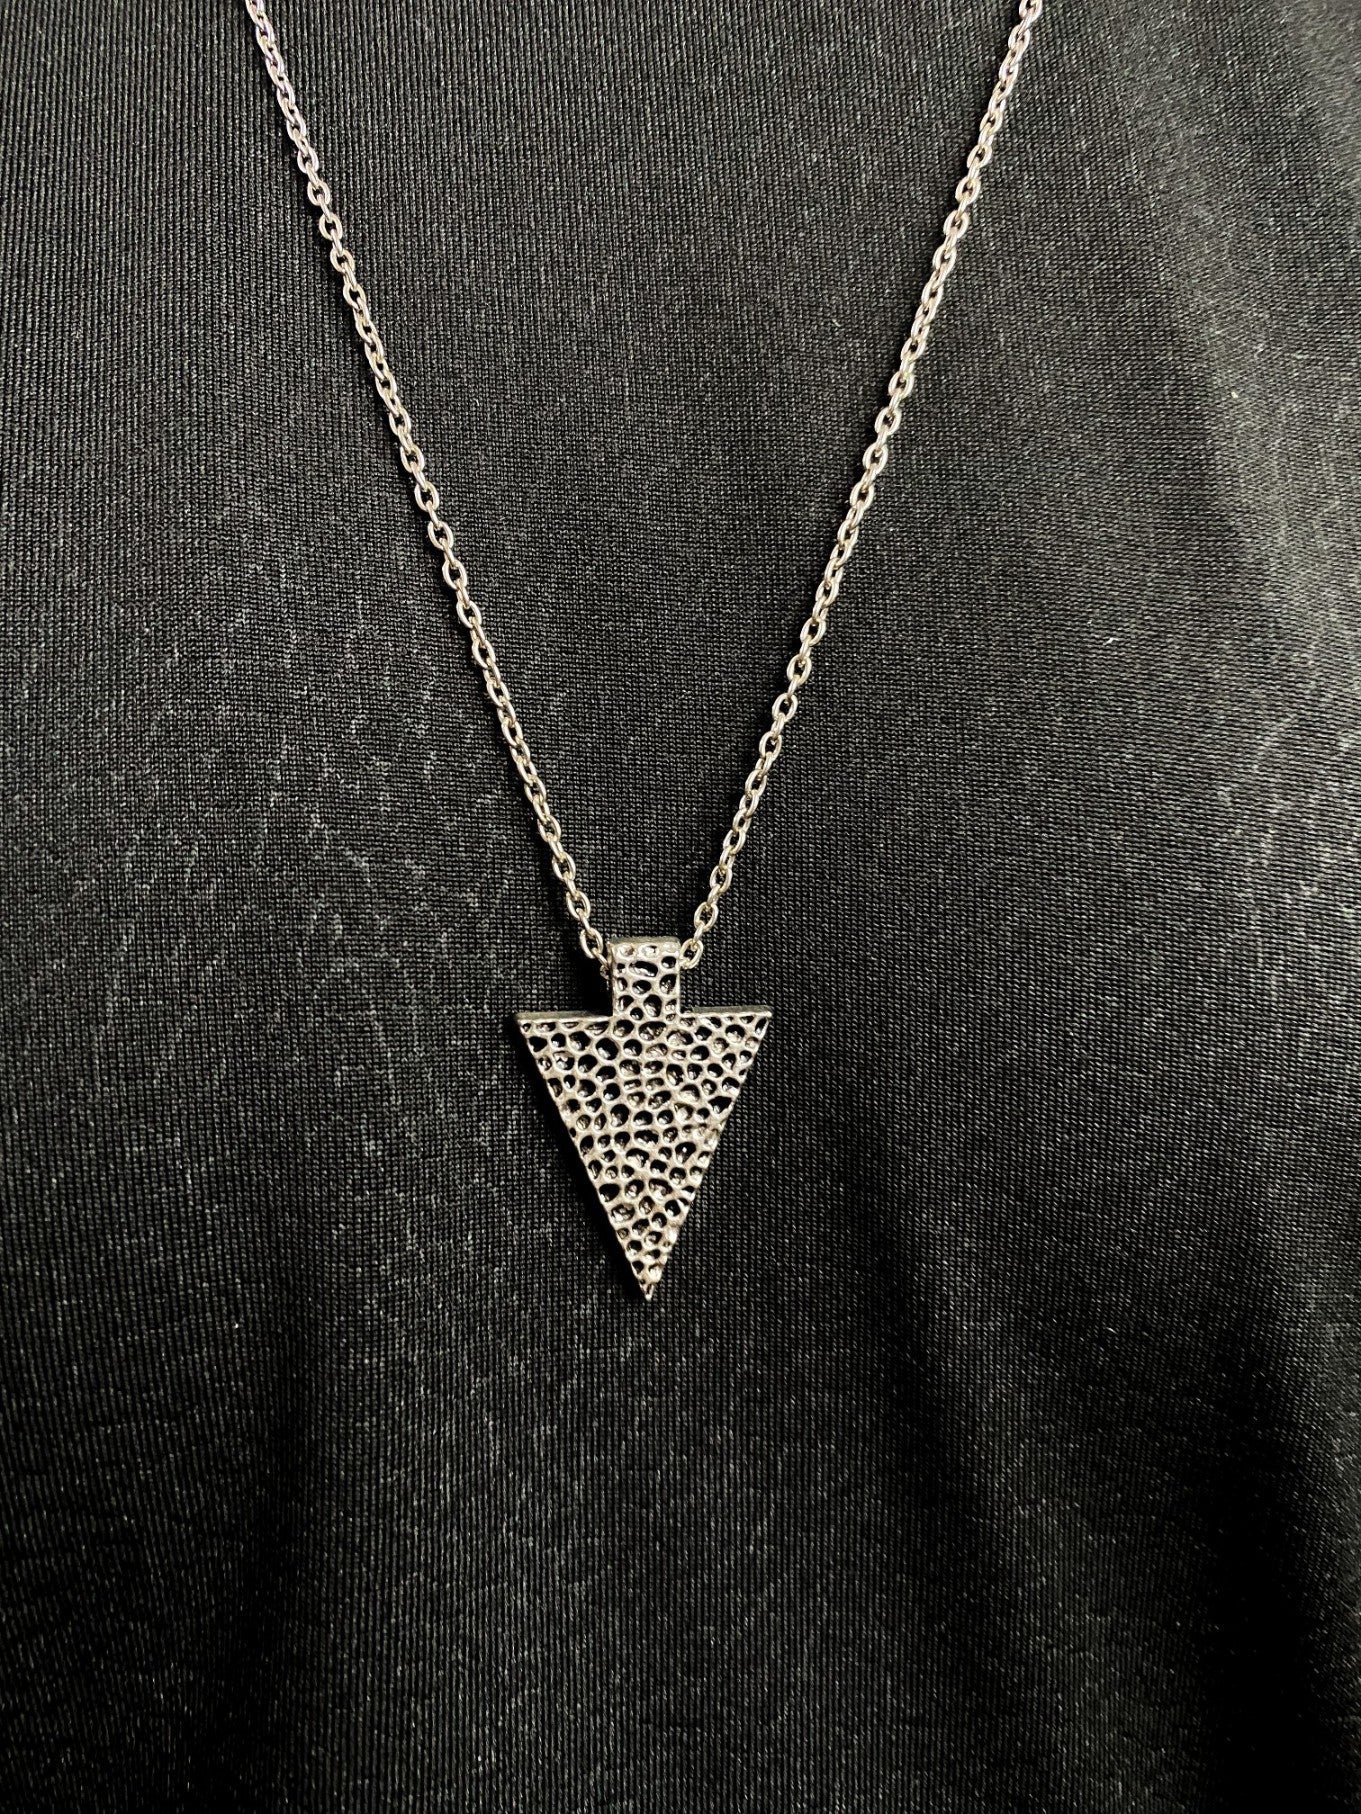 Textured Triangle Silver Spade Pendant With Chain